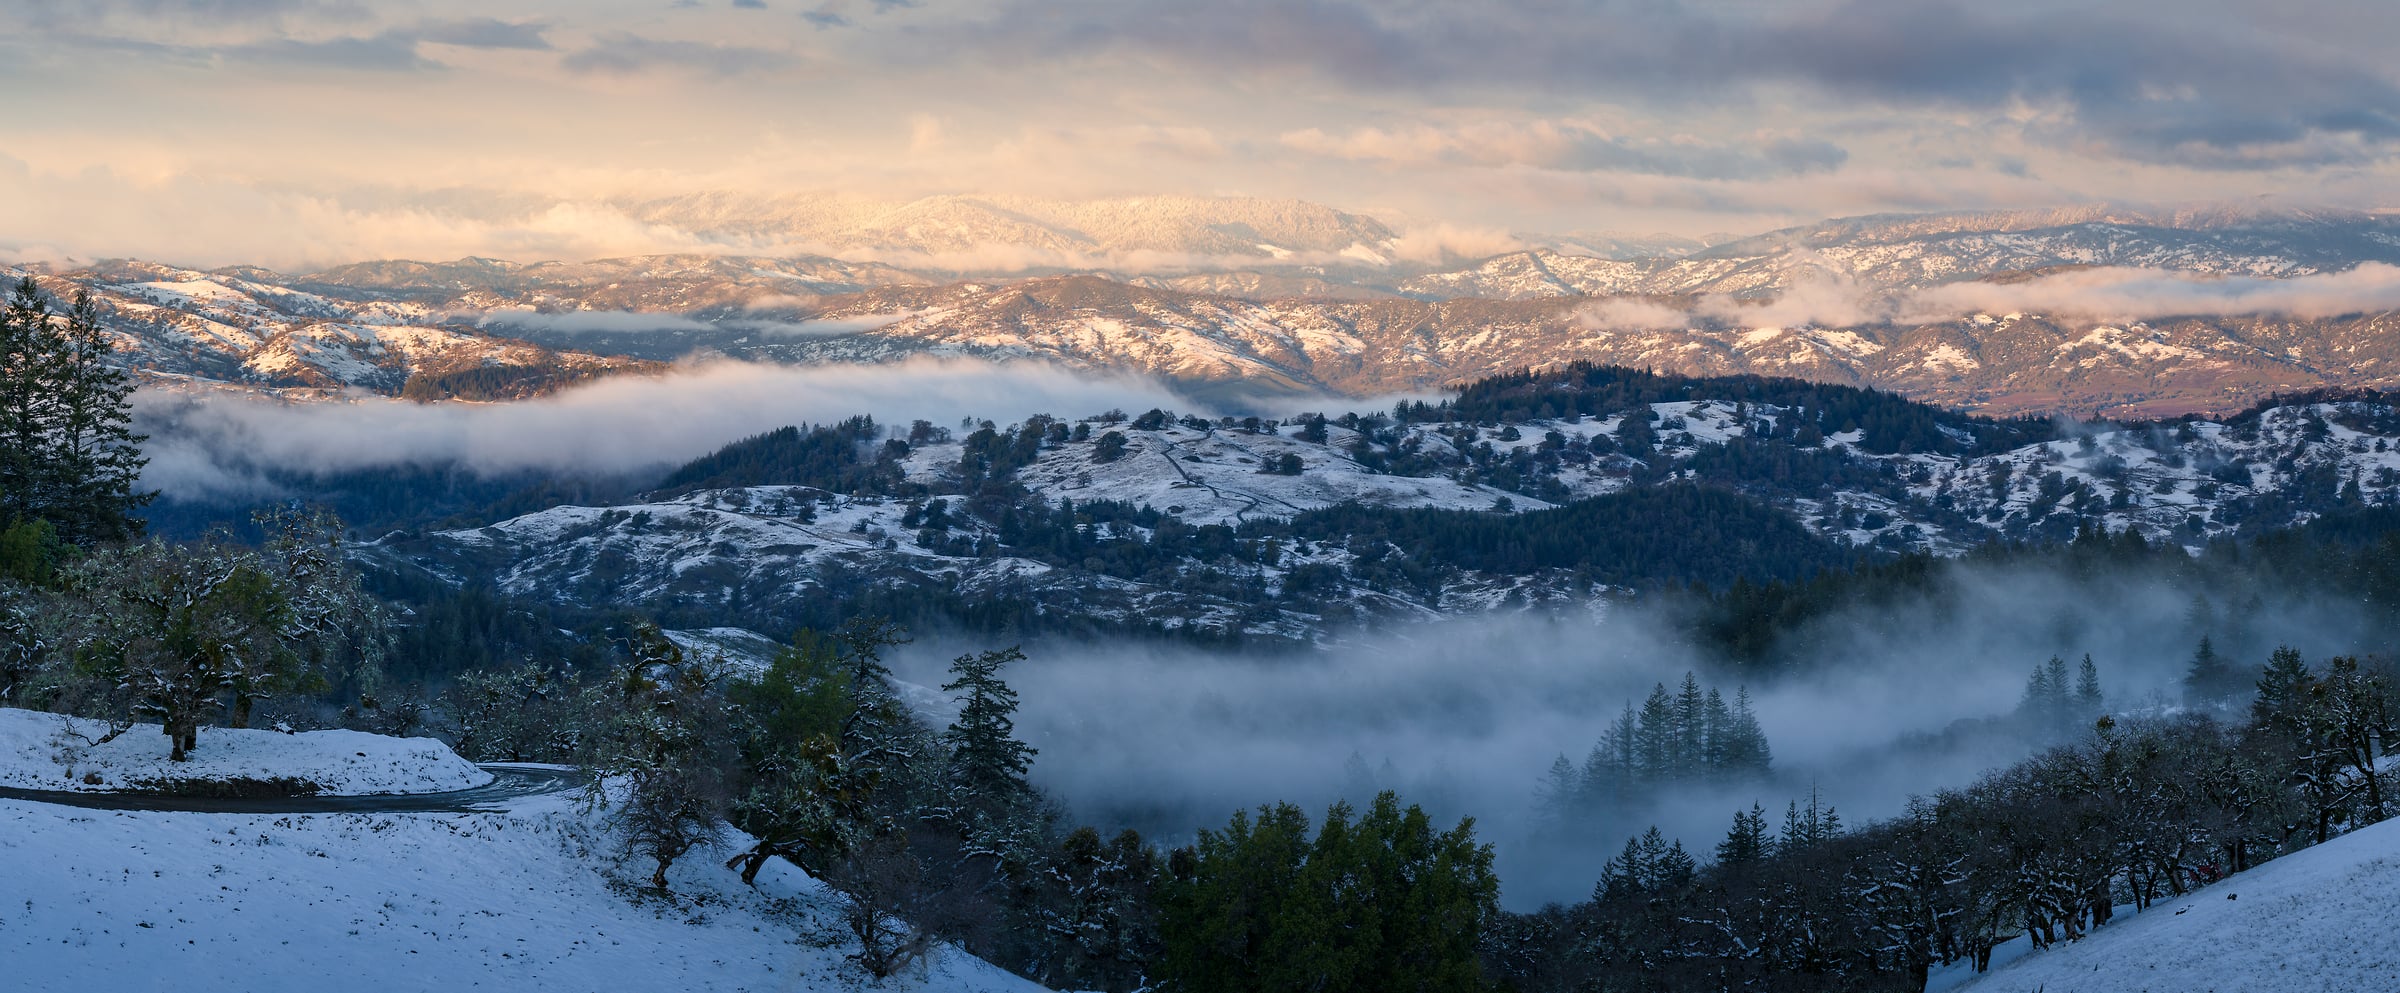 244 megapixels! A very high resolution, large-format VAST photo print of snow-covered hills after a snowstorm with beautiful clouds; landscape photograph created by Jeff Lewis in Mendocino County, California.